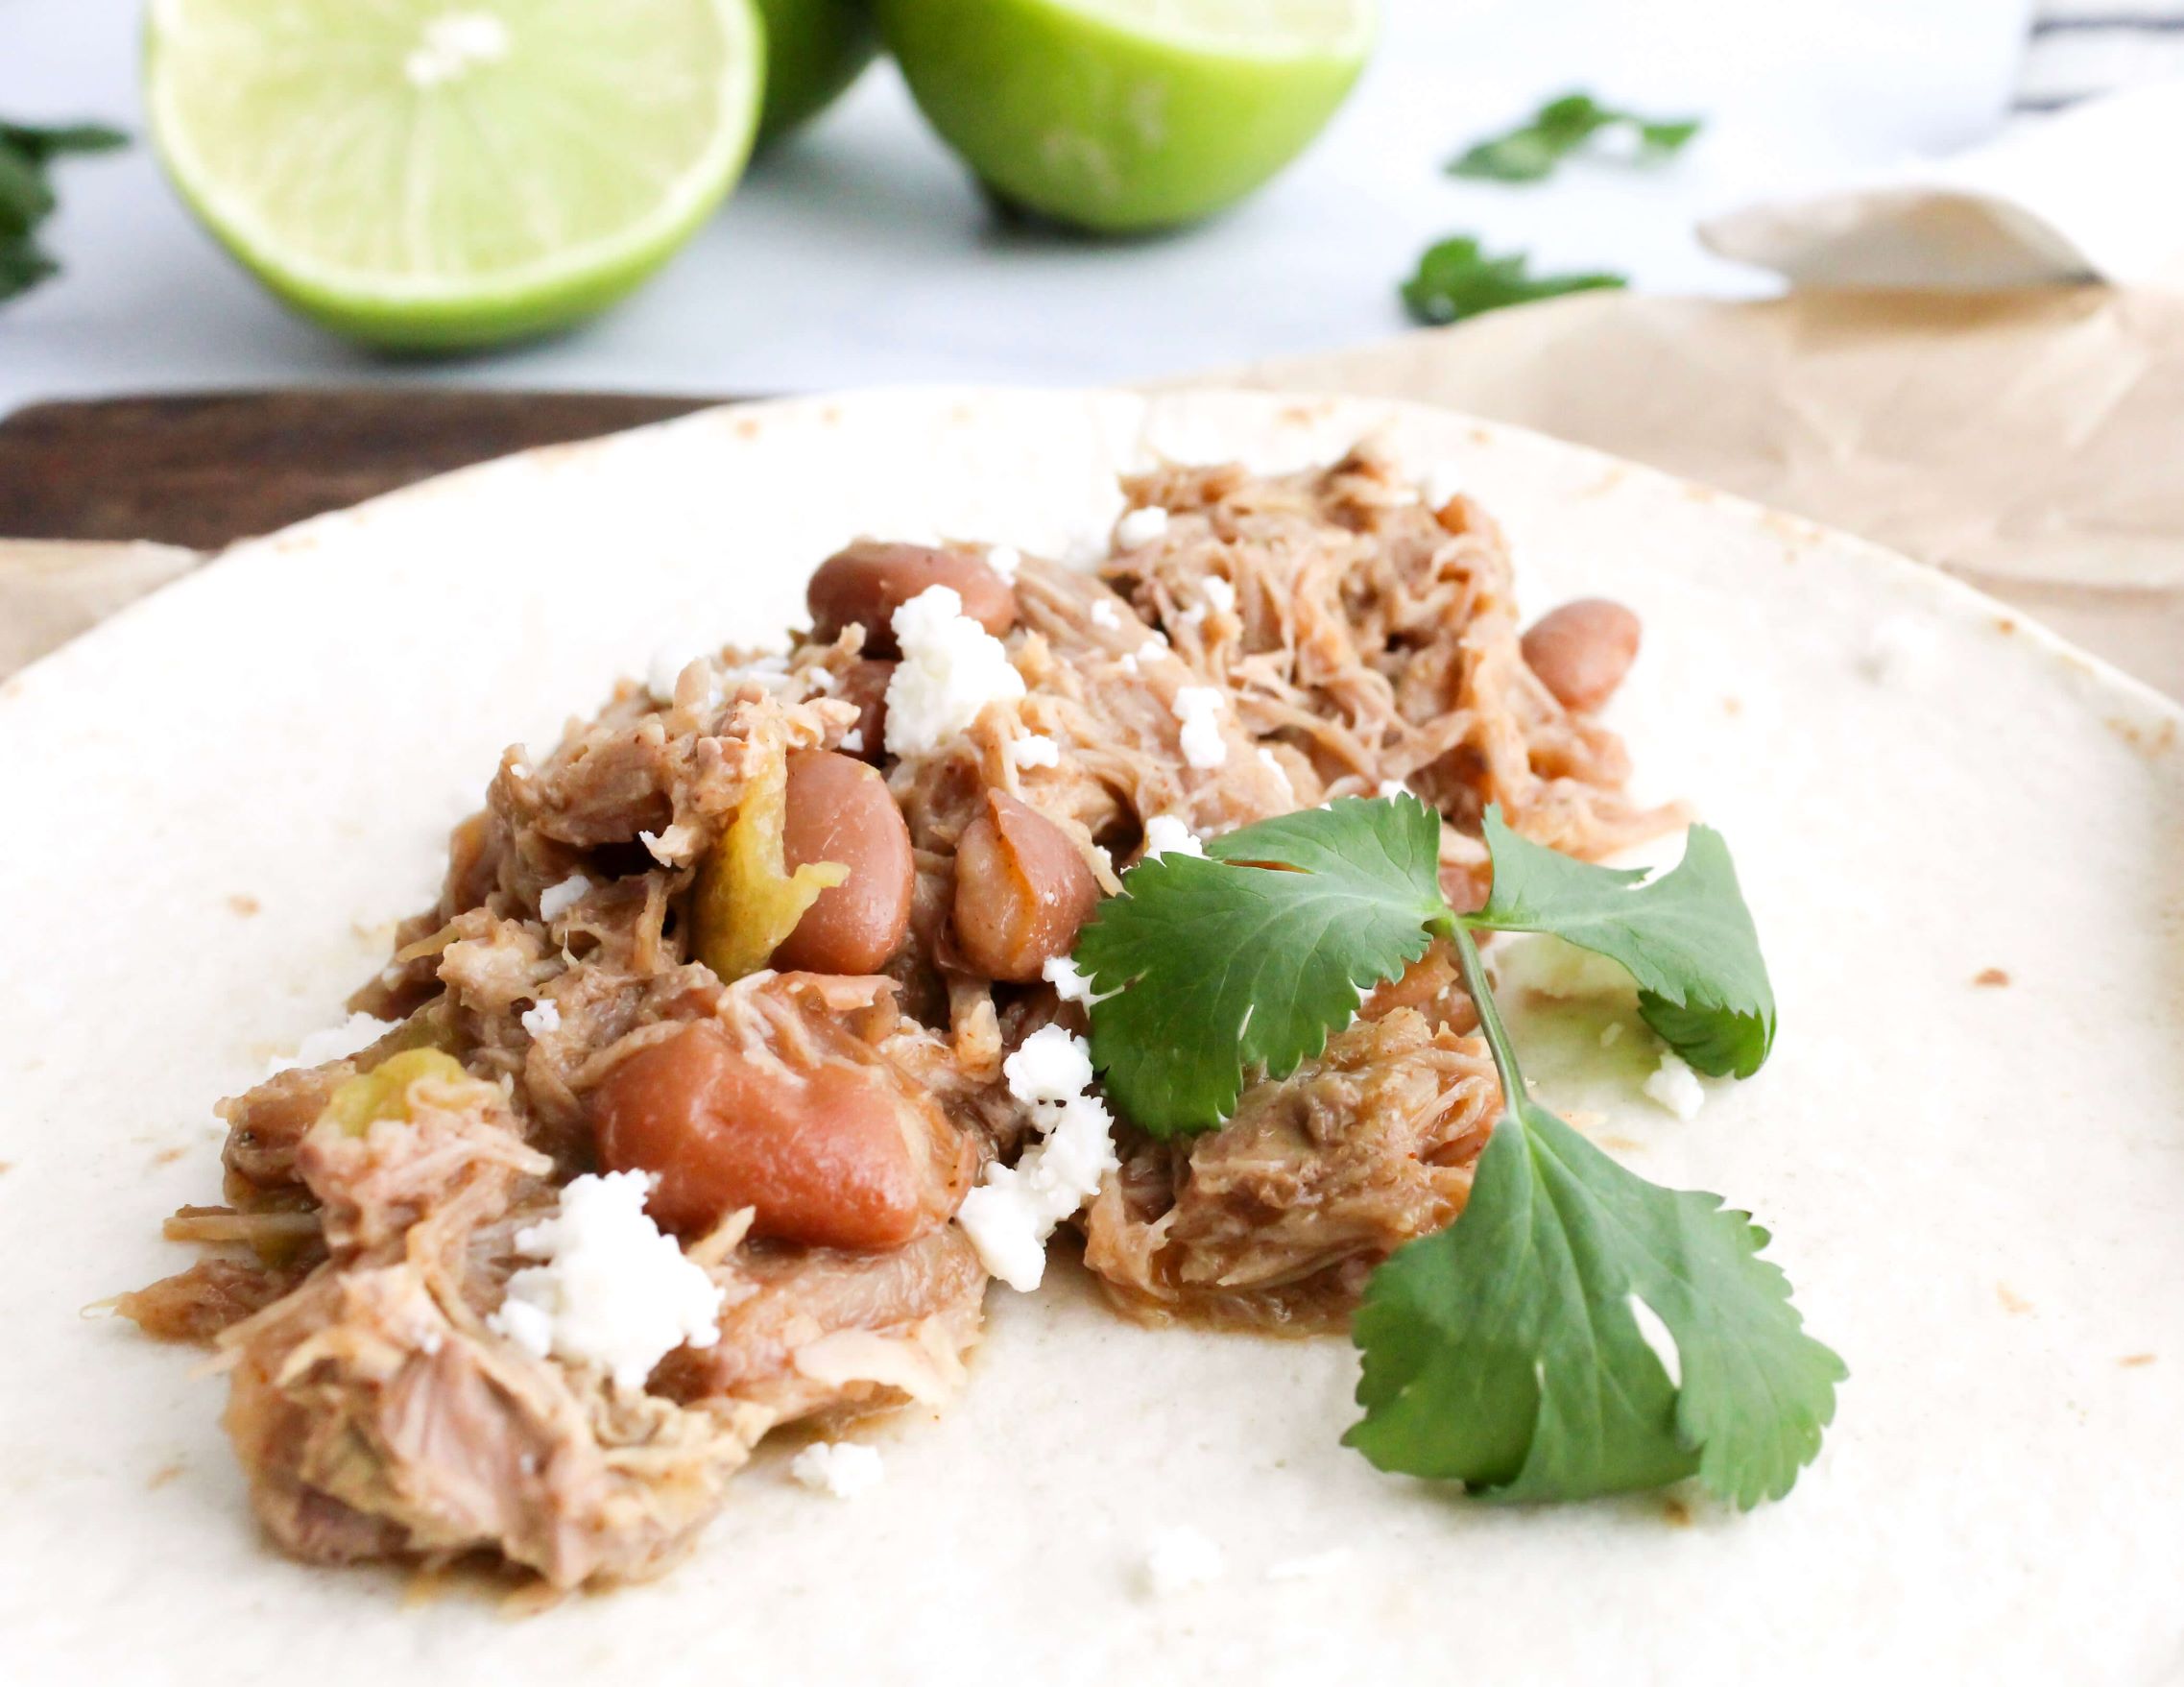 https://www.midwestlifeandstyle.com/wp-content/uploads/2021/02/Crockpot-Pork-Chalupa-6-Midwest-Life-and-Style-Blog.jpg